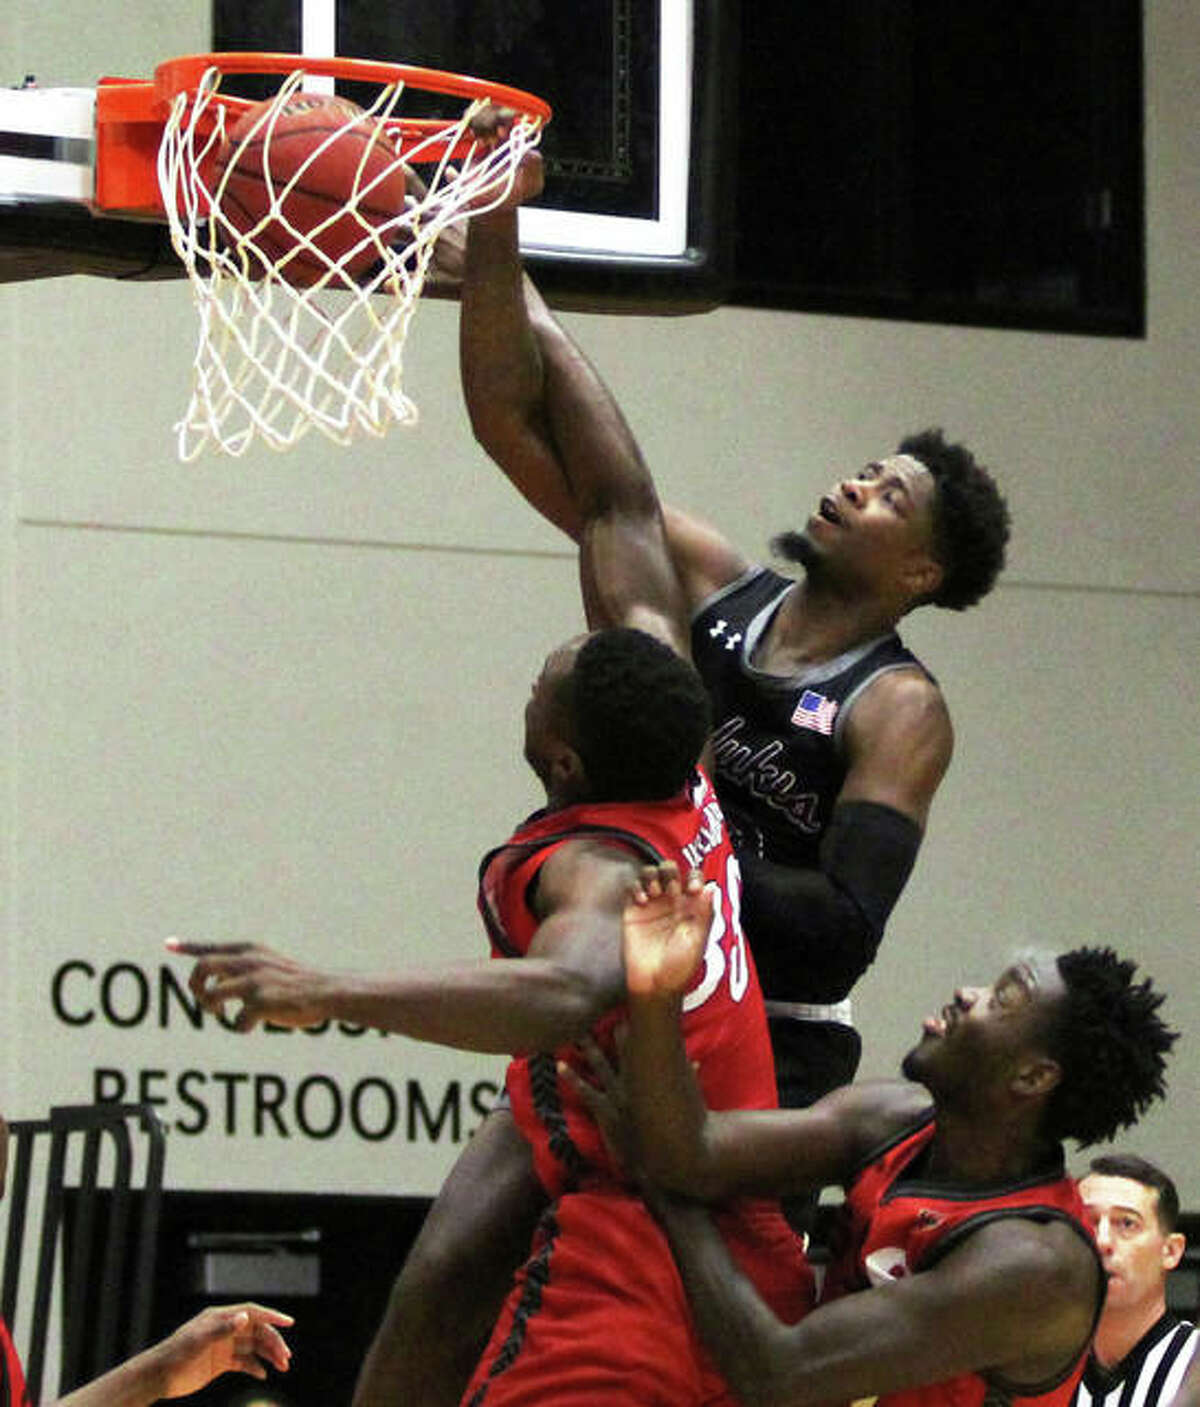 SIUC’s Armon Fletcher, a senior from Edwardsville, throws down a dunk over SIUE defenders during Saturday’s men’s college basketball game at Vadalabene Center in Edwardsville. Fletcher, a former all-stater with the Edwardsville Tigers, scored 24 points against the Cougars to surpass 1,000 points for his career with the Salukis.